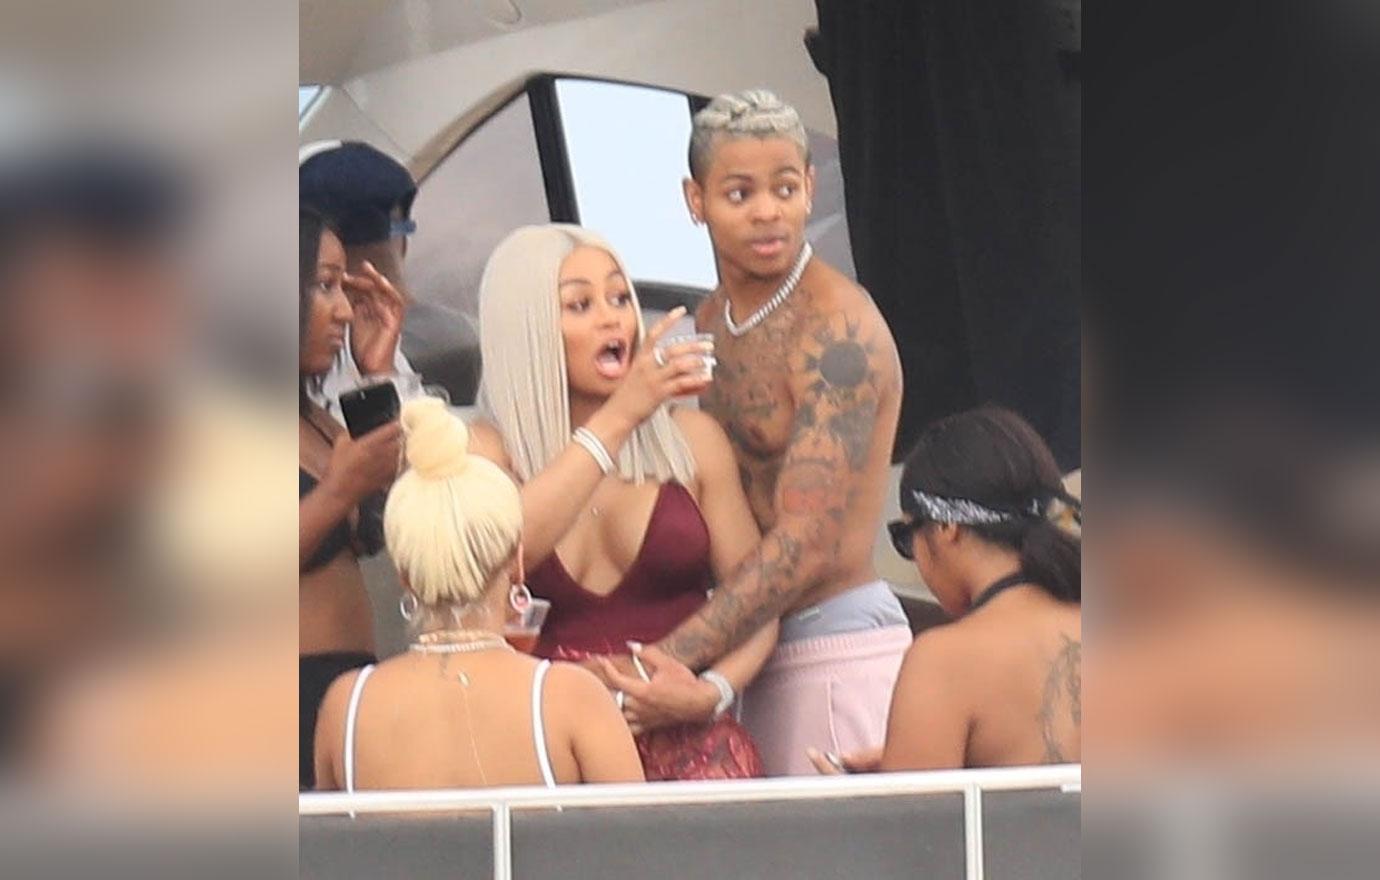 Blac Chyna Is Neatly Naked & Shows Serious PDA With Boyfriend Mechie